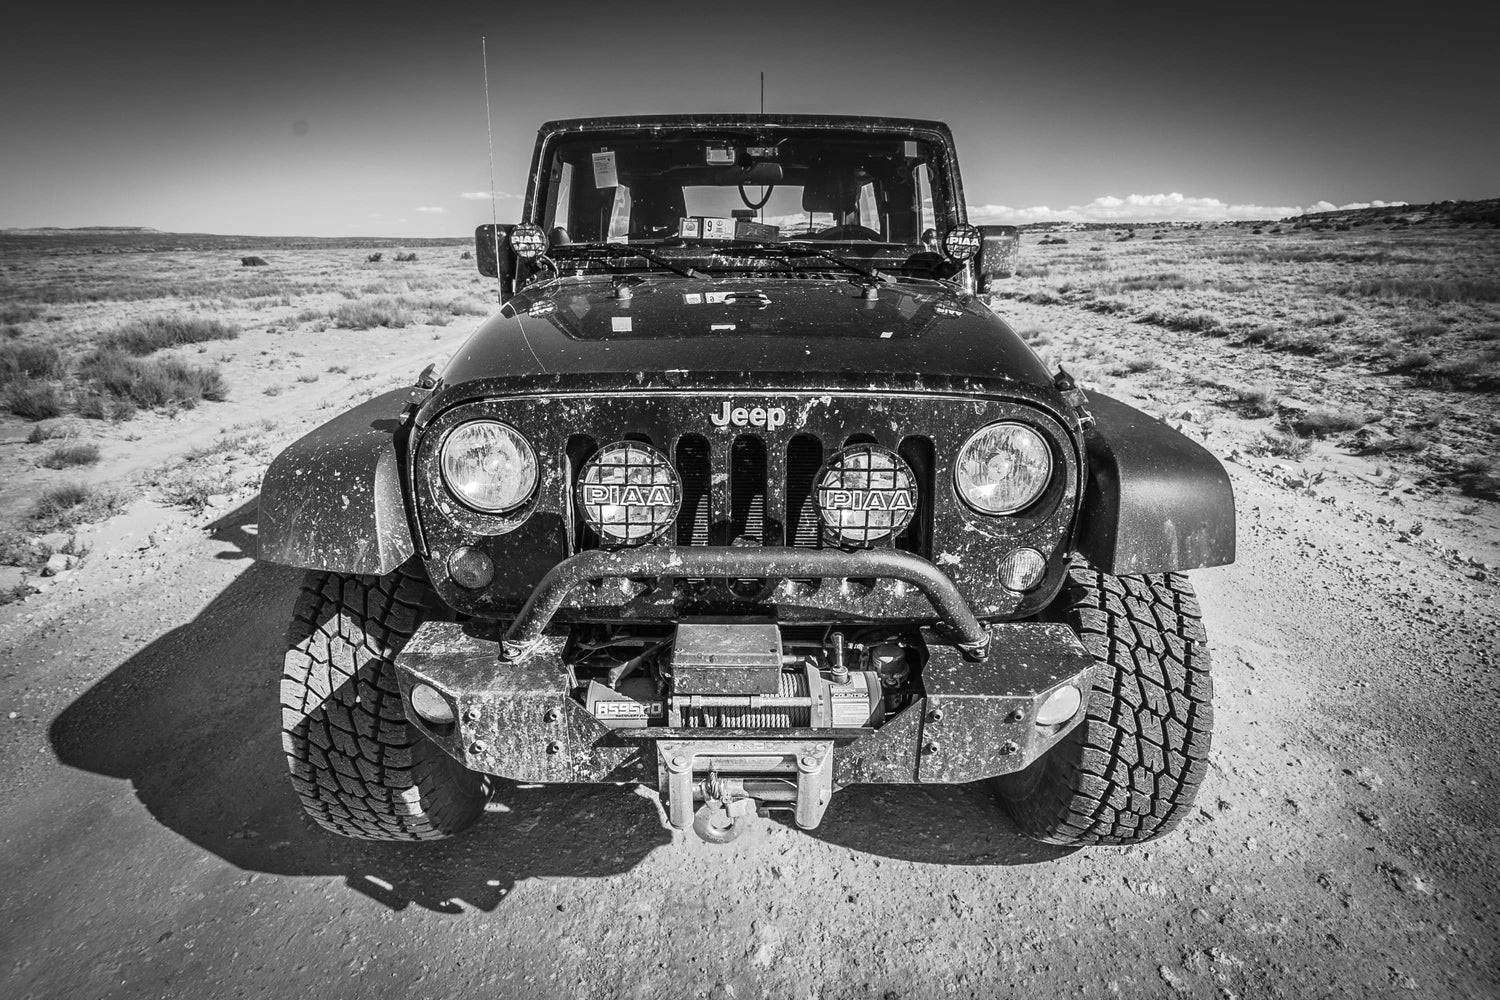 Fine black and white photographic and art print of a black Jeep Wrangler off-road driving along the White Rim Trail of Canyonlands National Park near Moab, Utah.